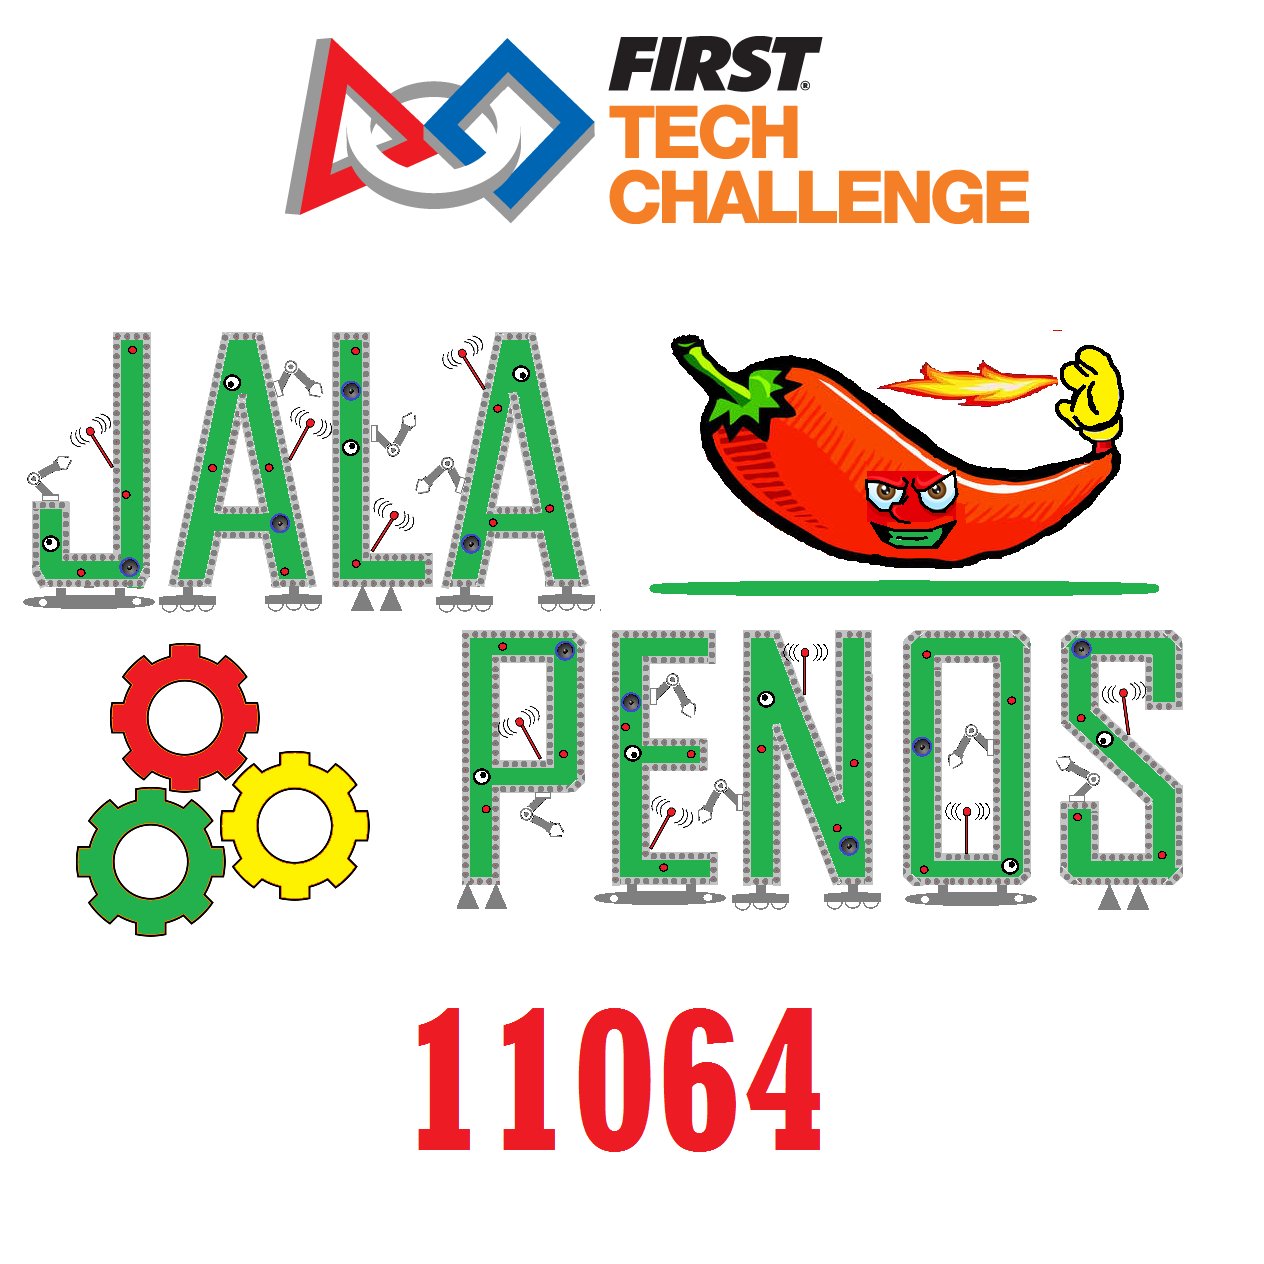 FTC 11064
The Jalapenos is a FIRST Robotics team that competes in the FIRST Tech Challenge. 
We are the first and only 